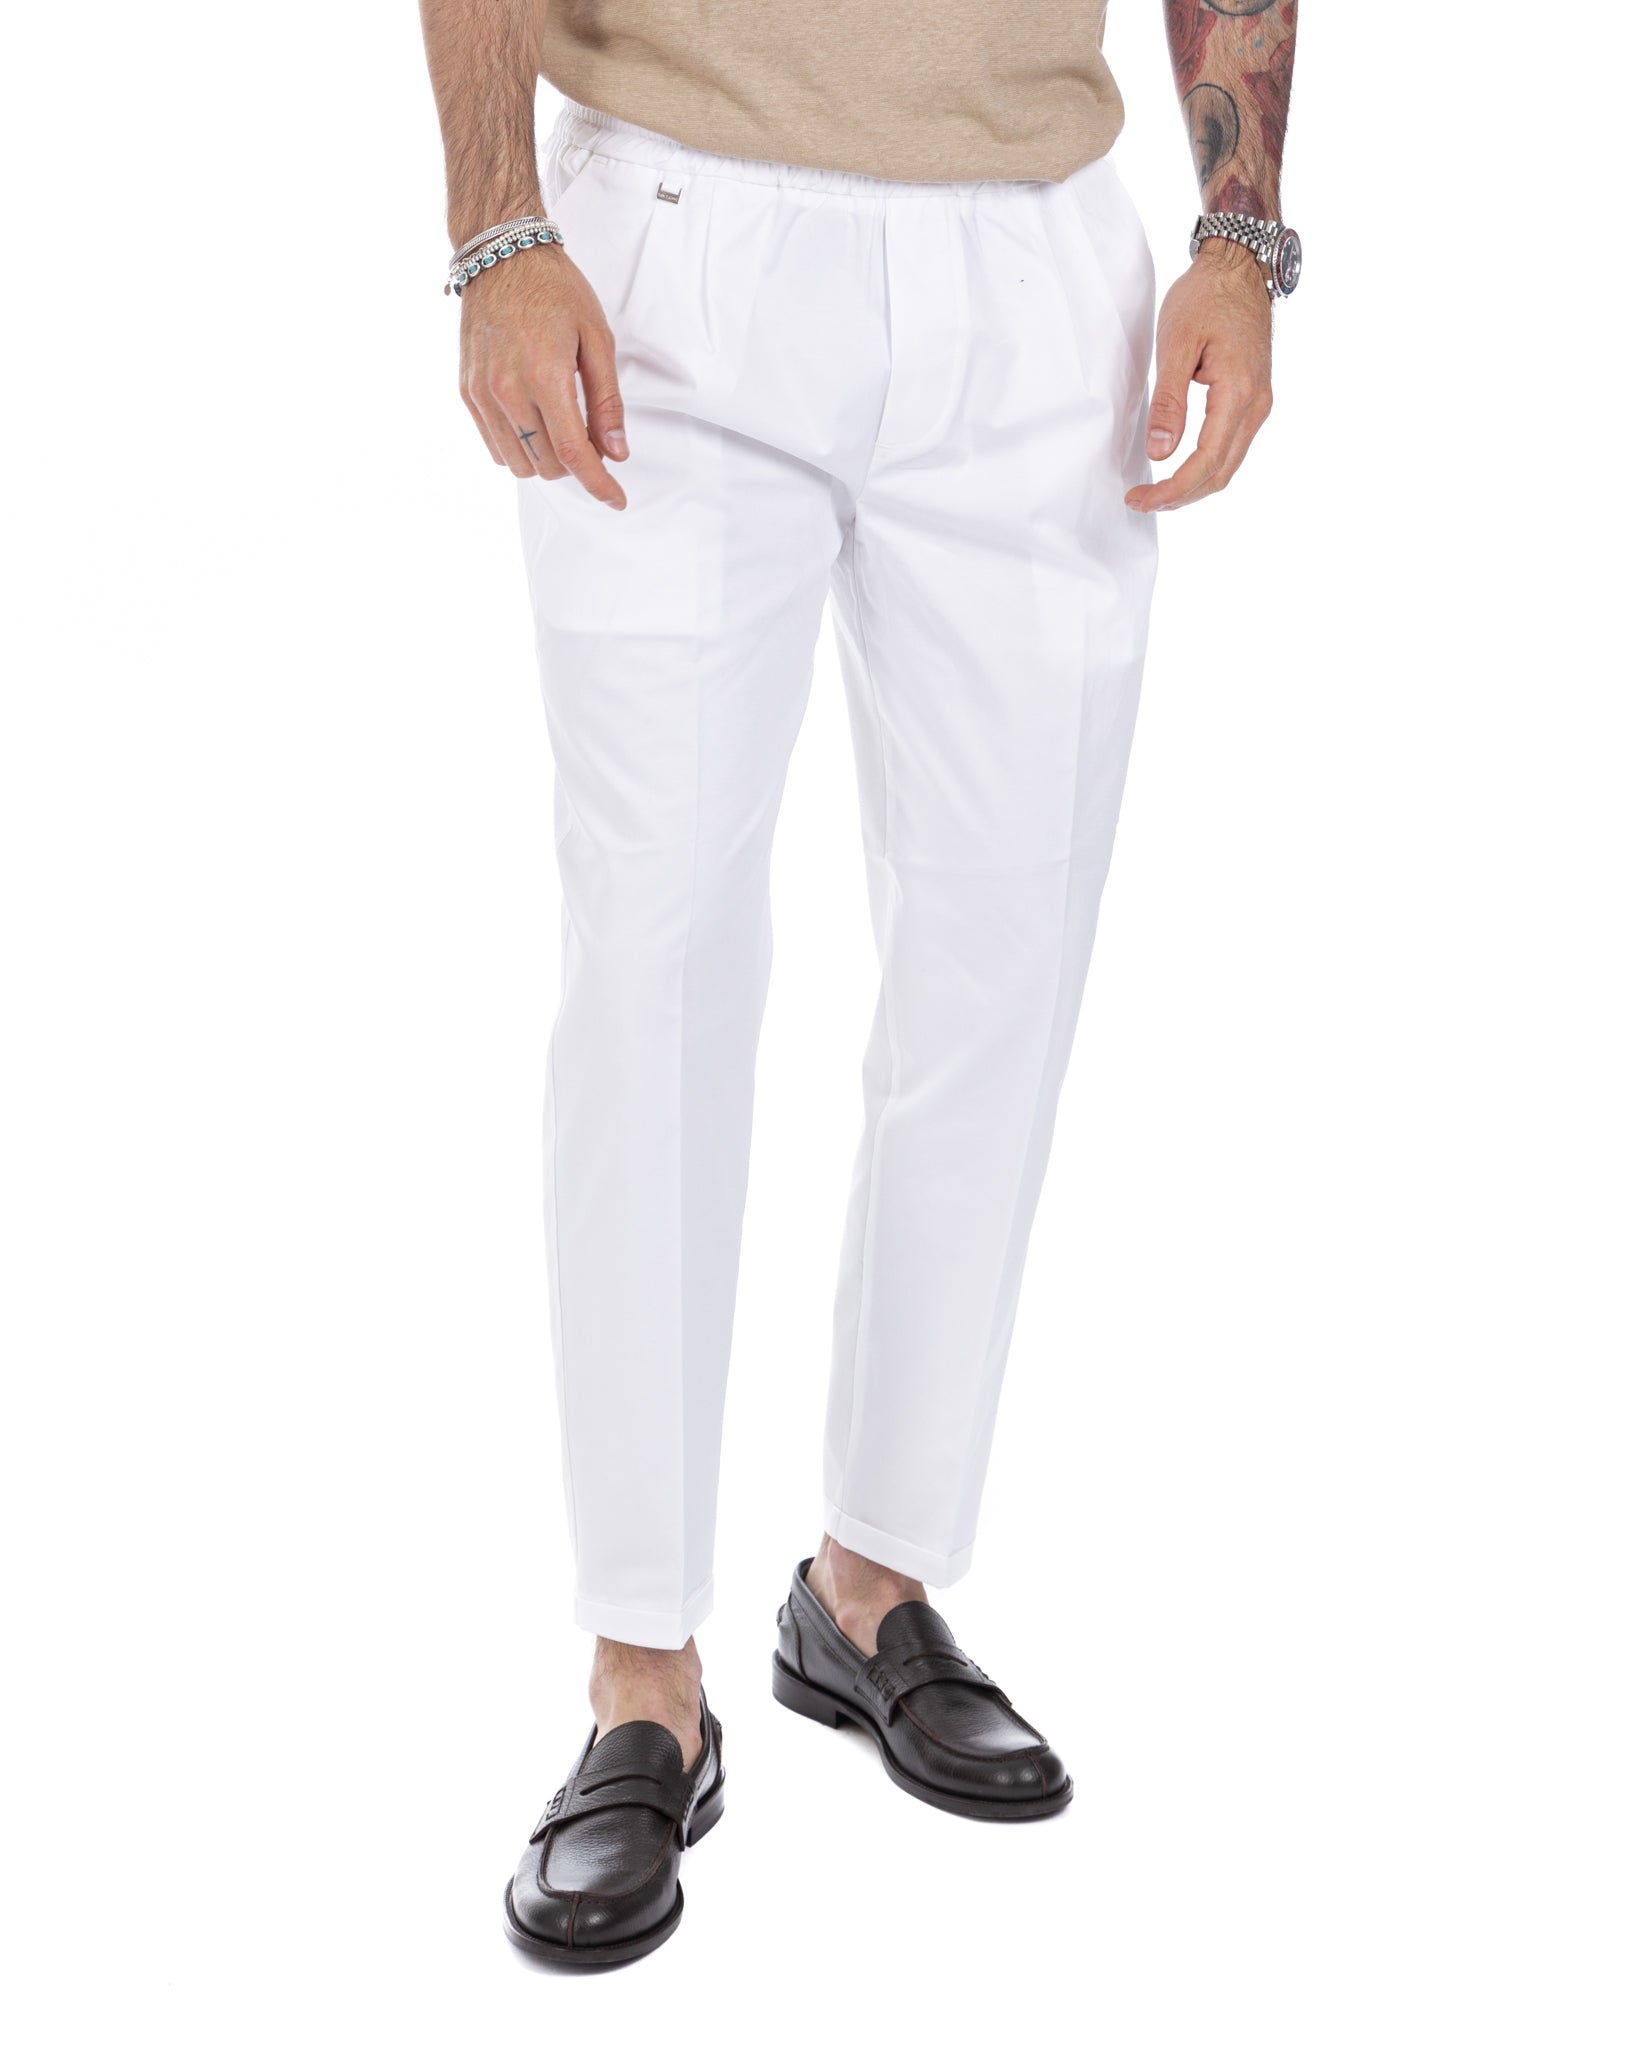 Larry - white summer cotton trousers